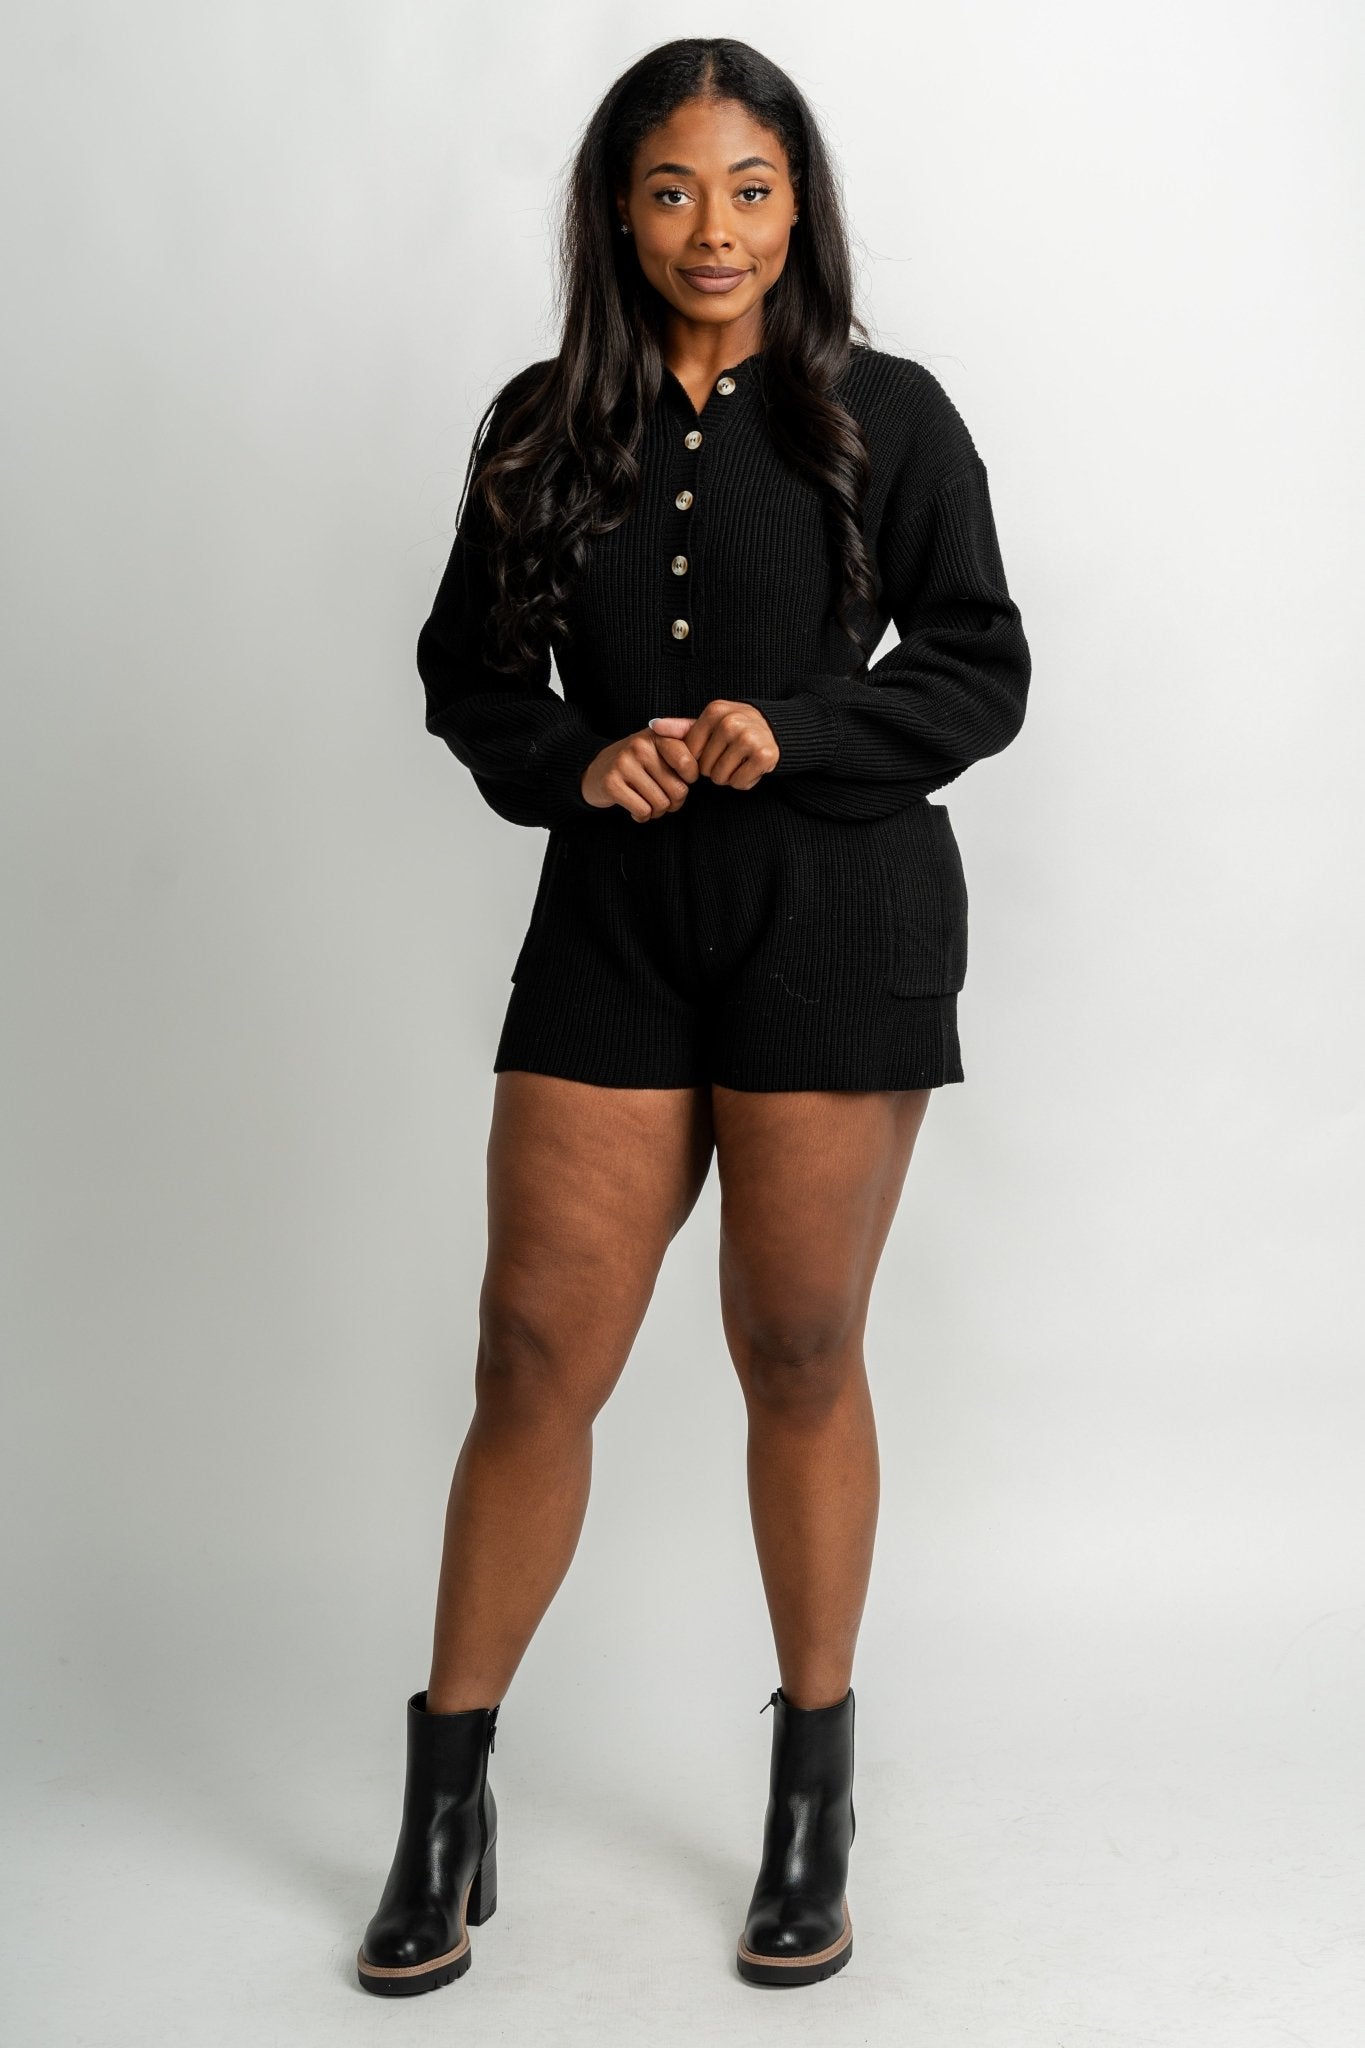 Long sleeve sweater romper black - Trendy Romper - Fashion Rompers & Pantsuits at Lush Fashion Lounge Boutique in Oklahoma City